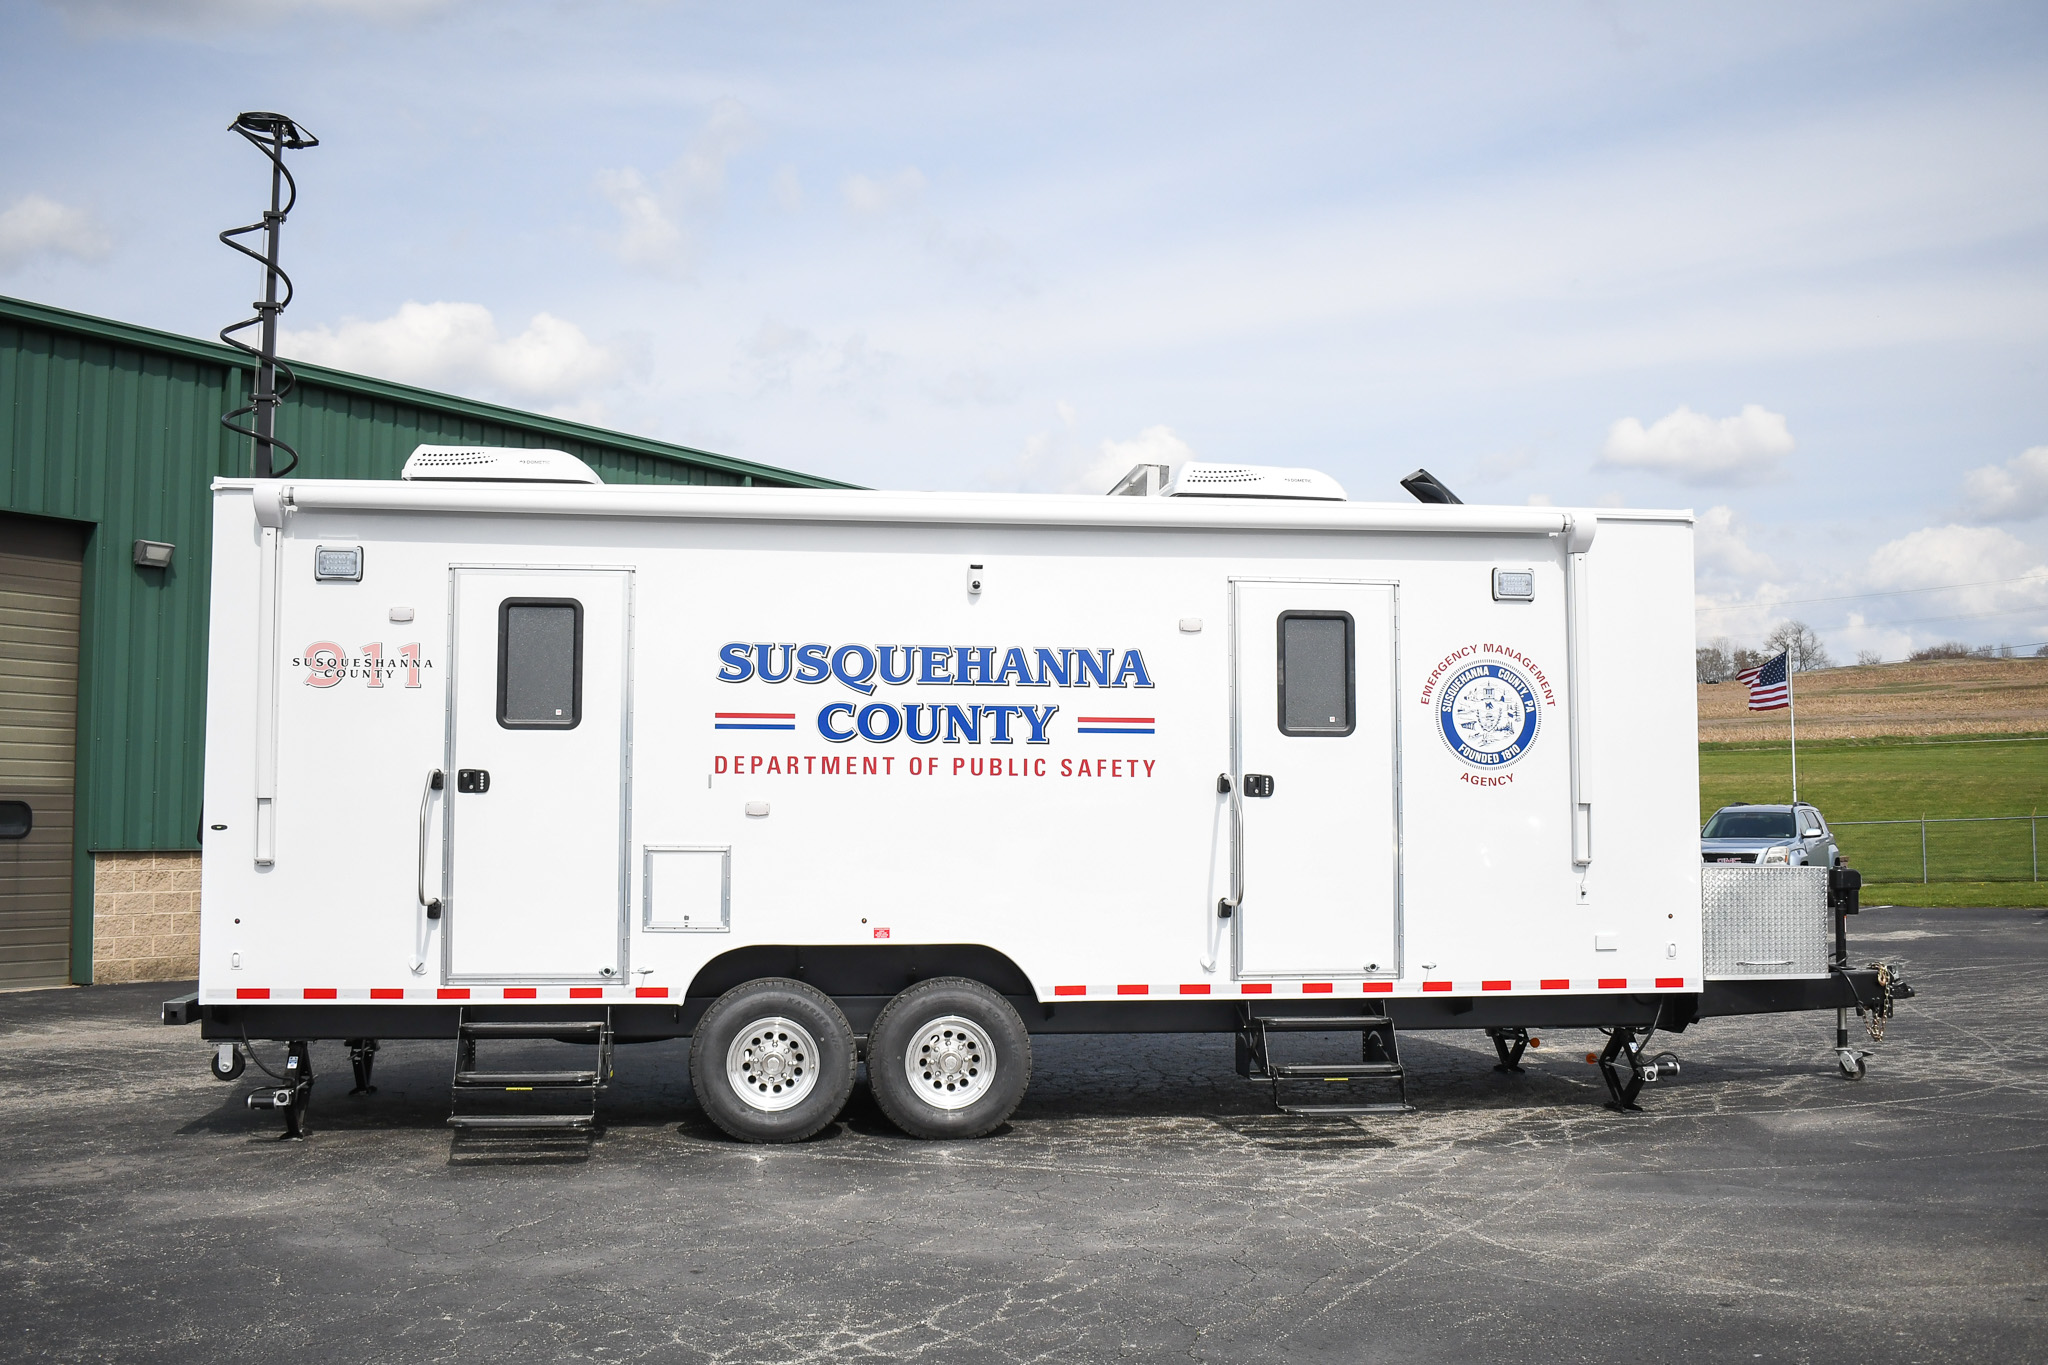 A side view of the unit for Susquehanna County, PA.